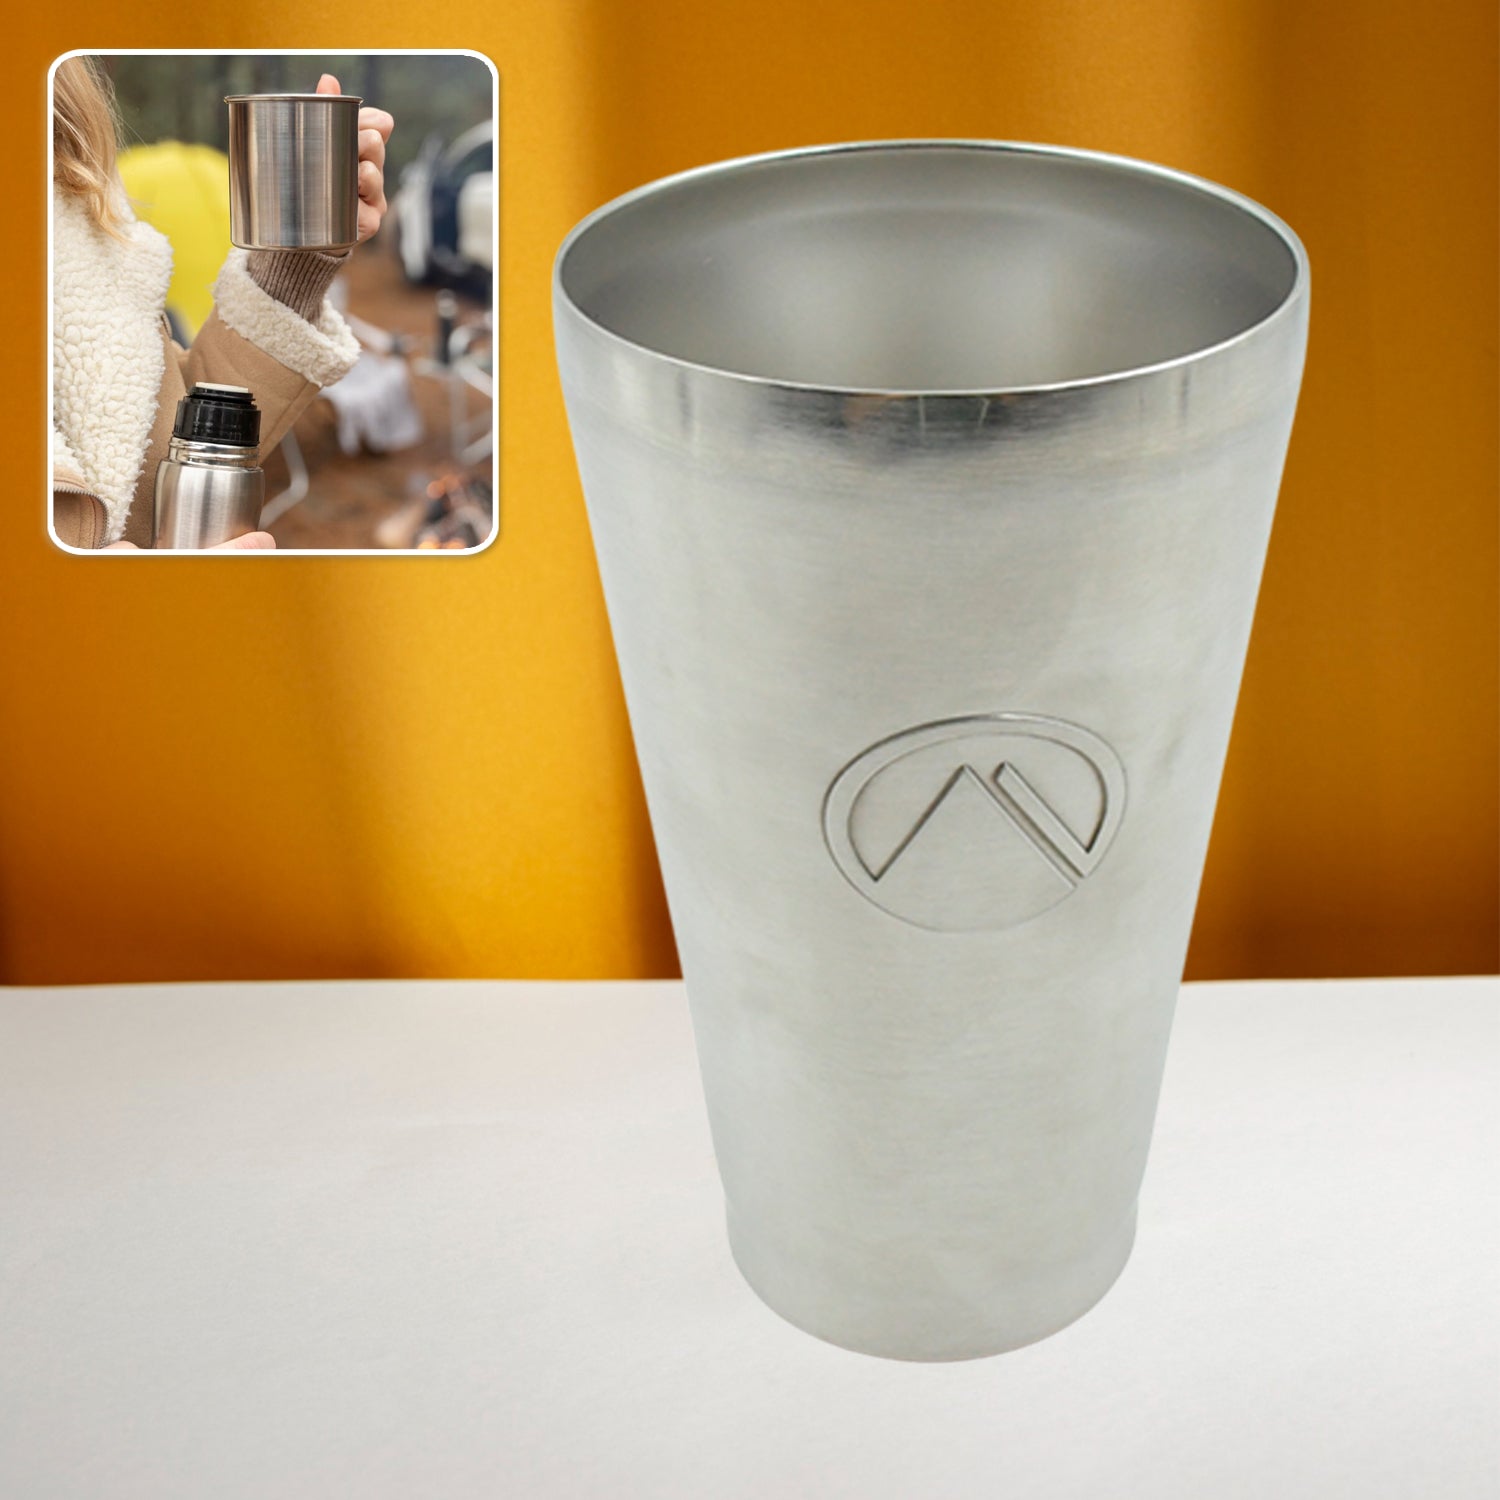 5780 Stainless Steel Vacuum Insulated Travel Mug/ Glass Reusable Water Glass/Serving Unbreakable Drinking Glasses Plain Design for Everyday Use Drinks Water, Tea Mug, Outdoor, Home, Office (1 Pc) - deal99.in